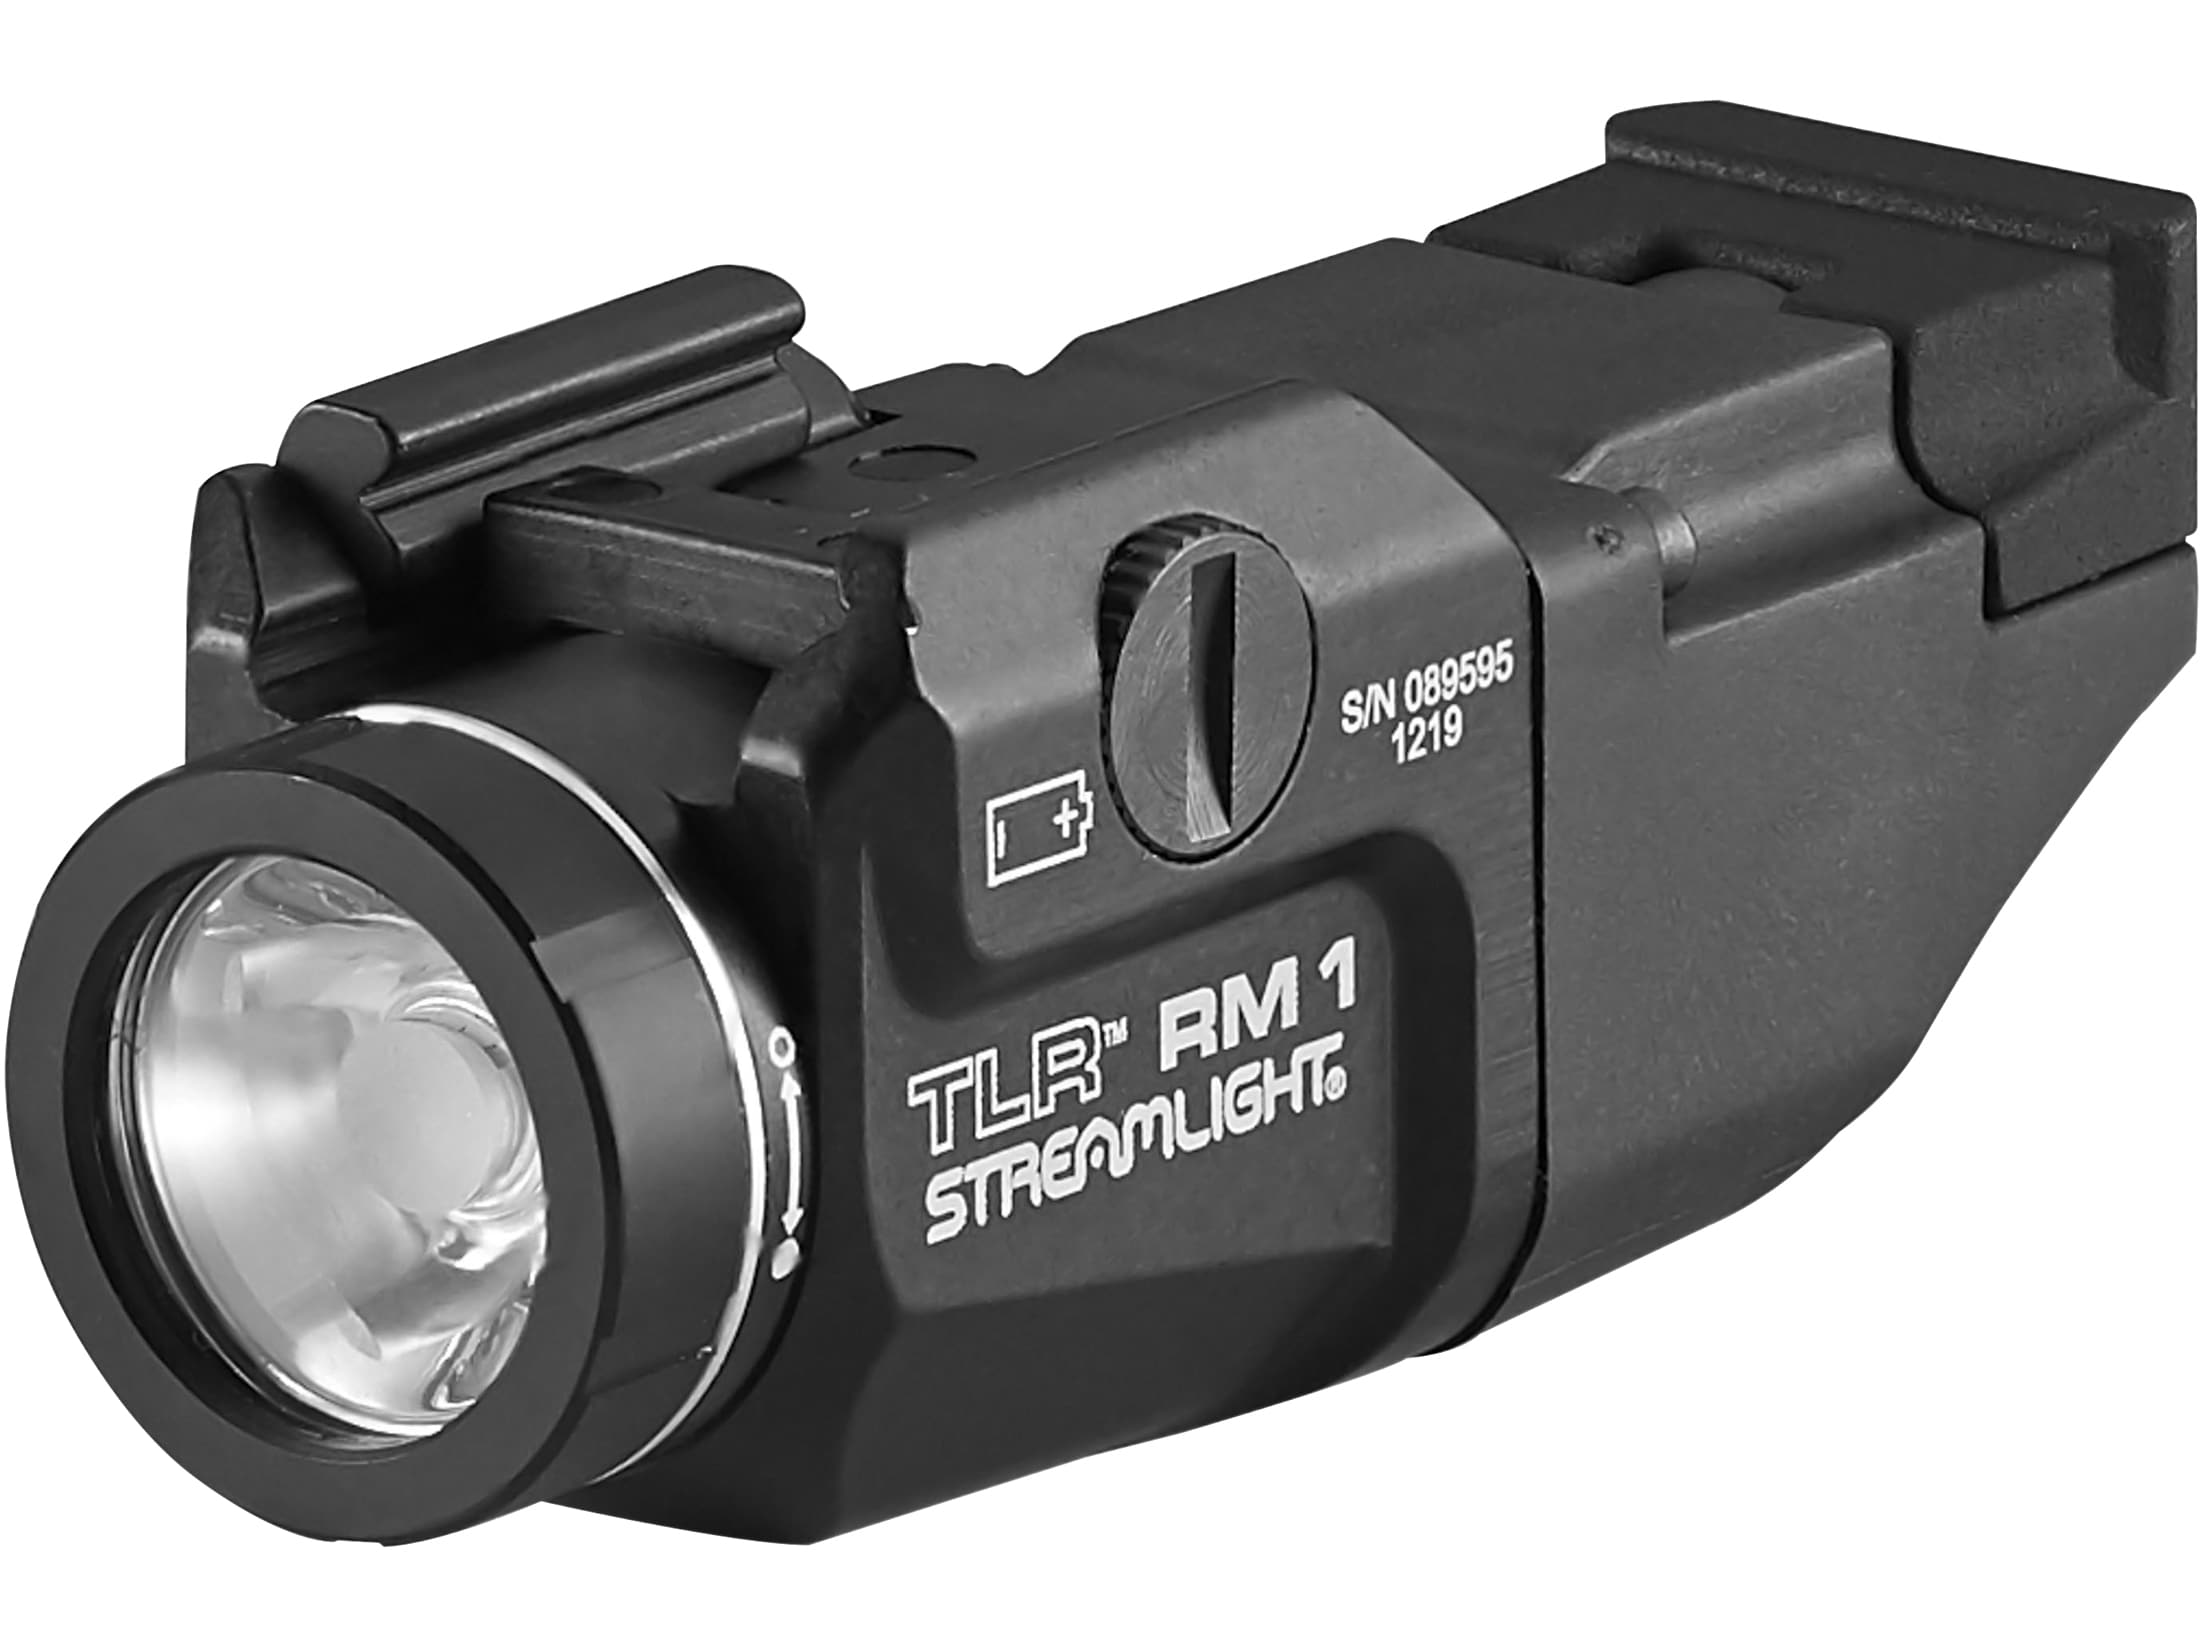 Streamlight TLR RM 1 Weapon Light LED Kit with 1 CR123A Battery Aluminum Black For Sale